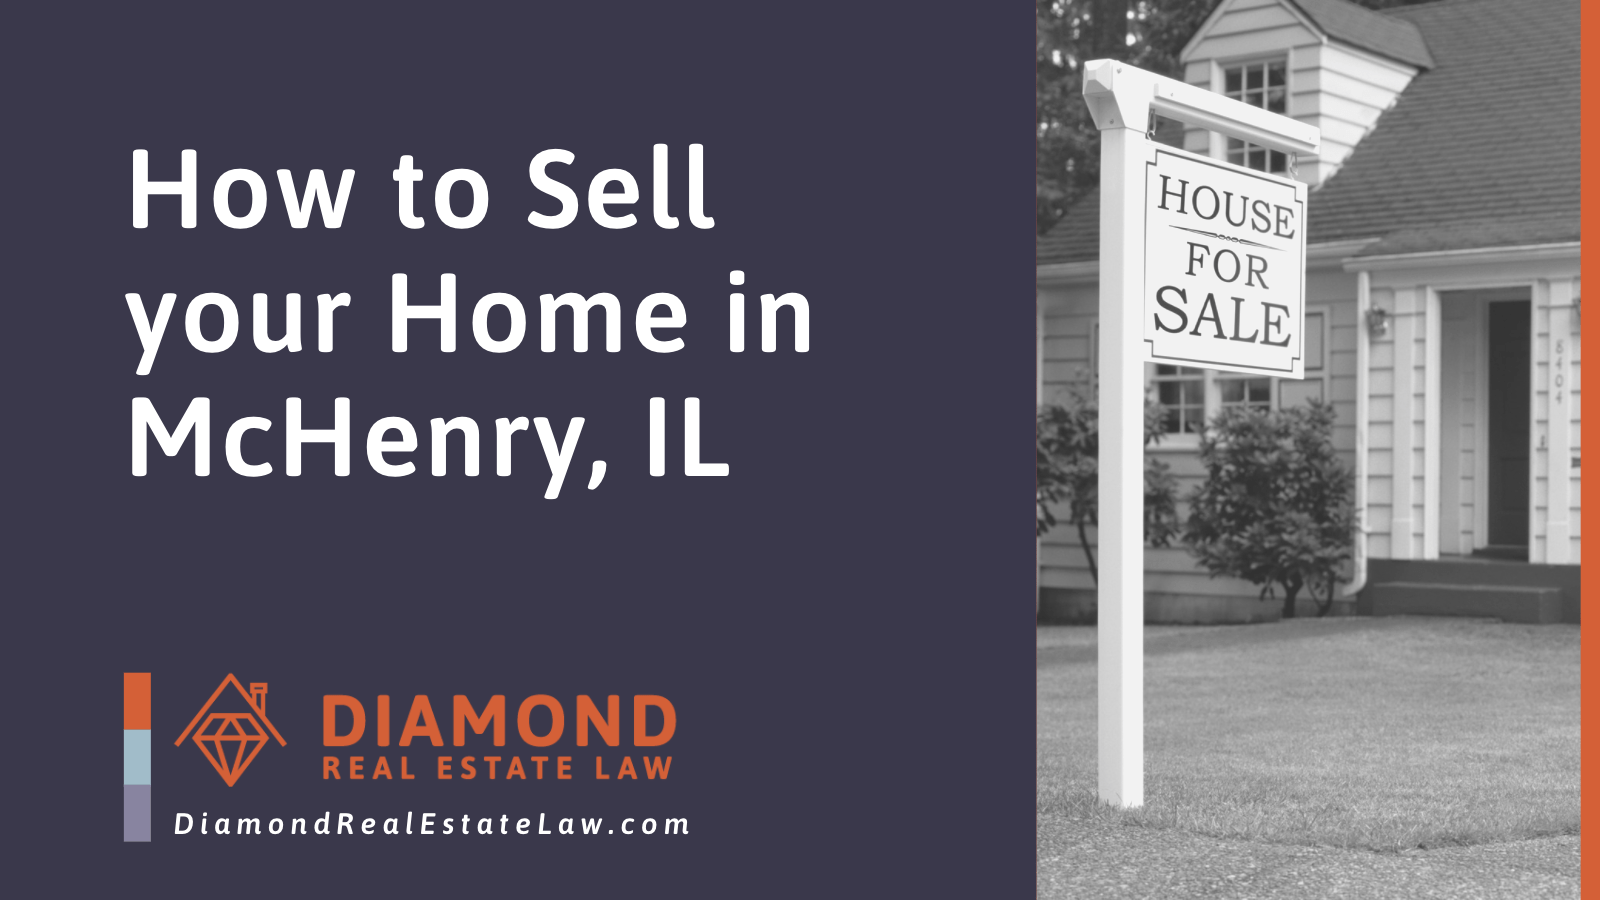 How to Sell your Home in McHenry, IL - Diamond Real Estate Law | McHenry, IL Residential Real Estate Lawyer